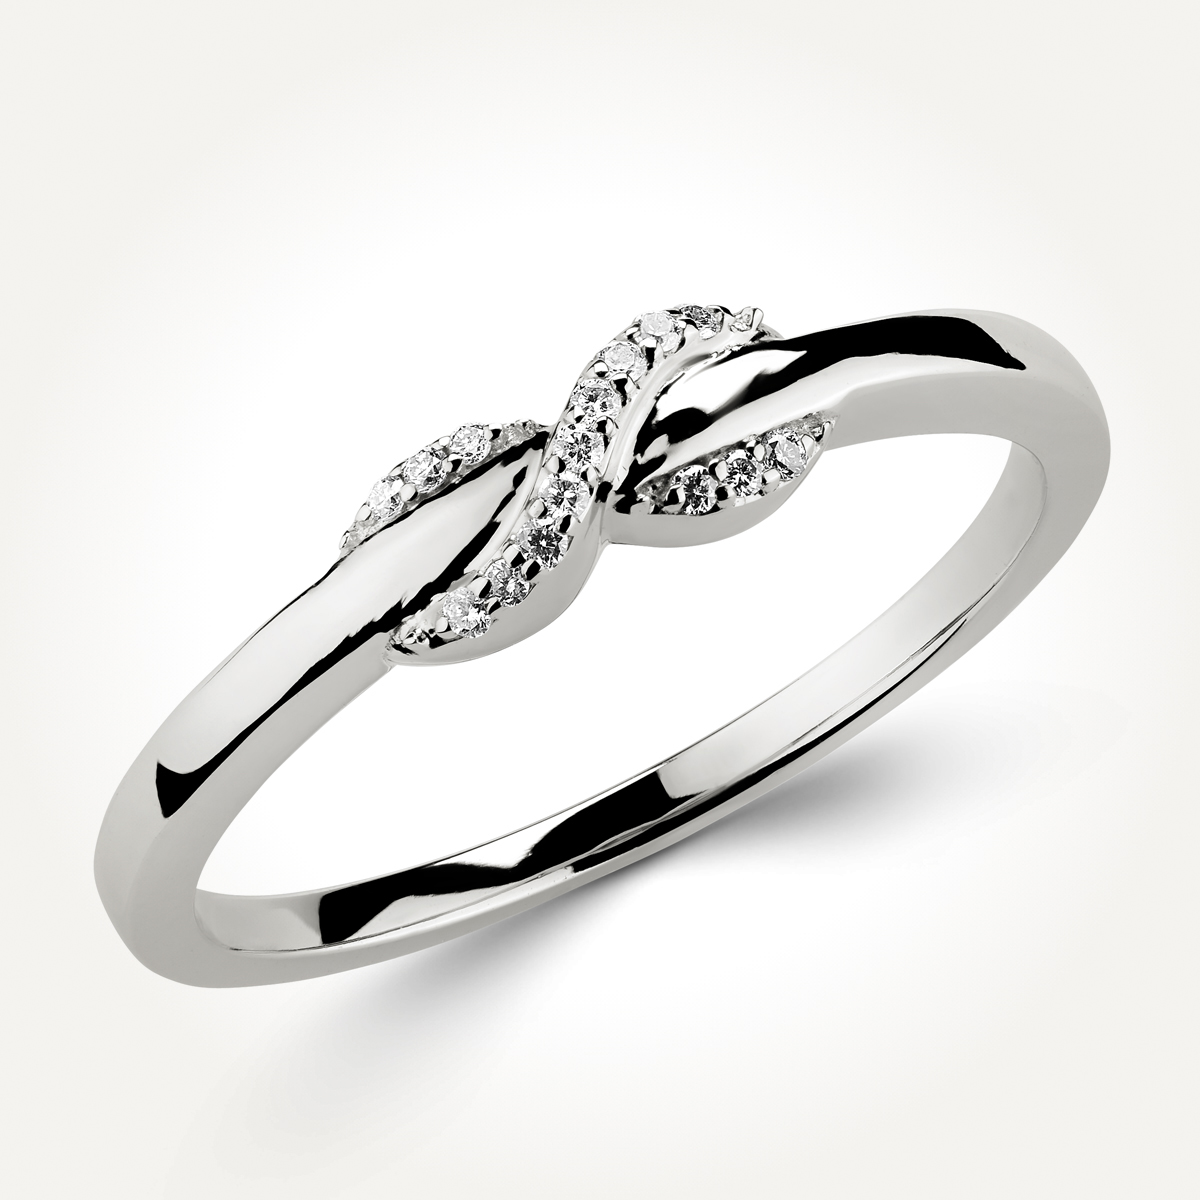 14KT White Gold Promise Ring 0.03 CT. T.W.